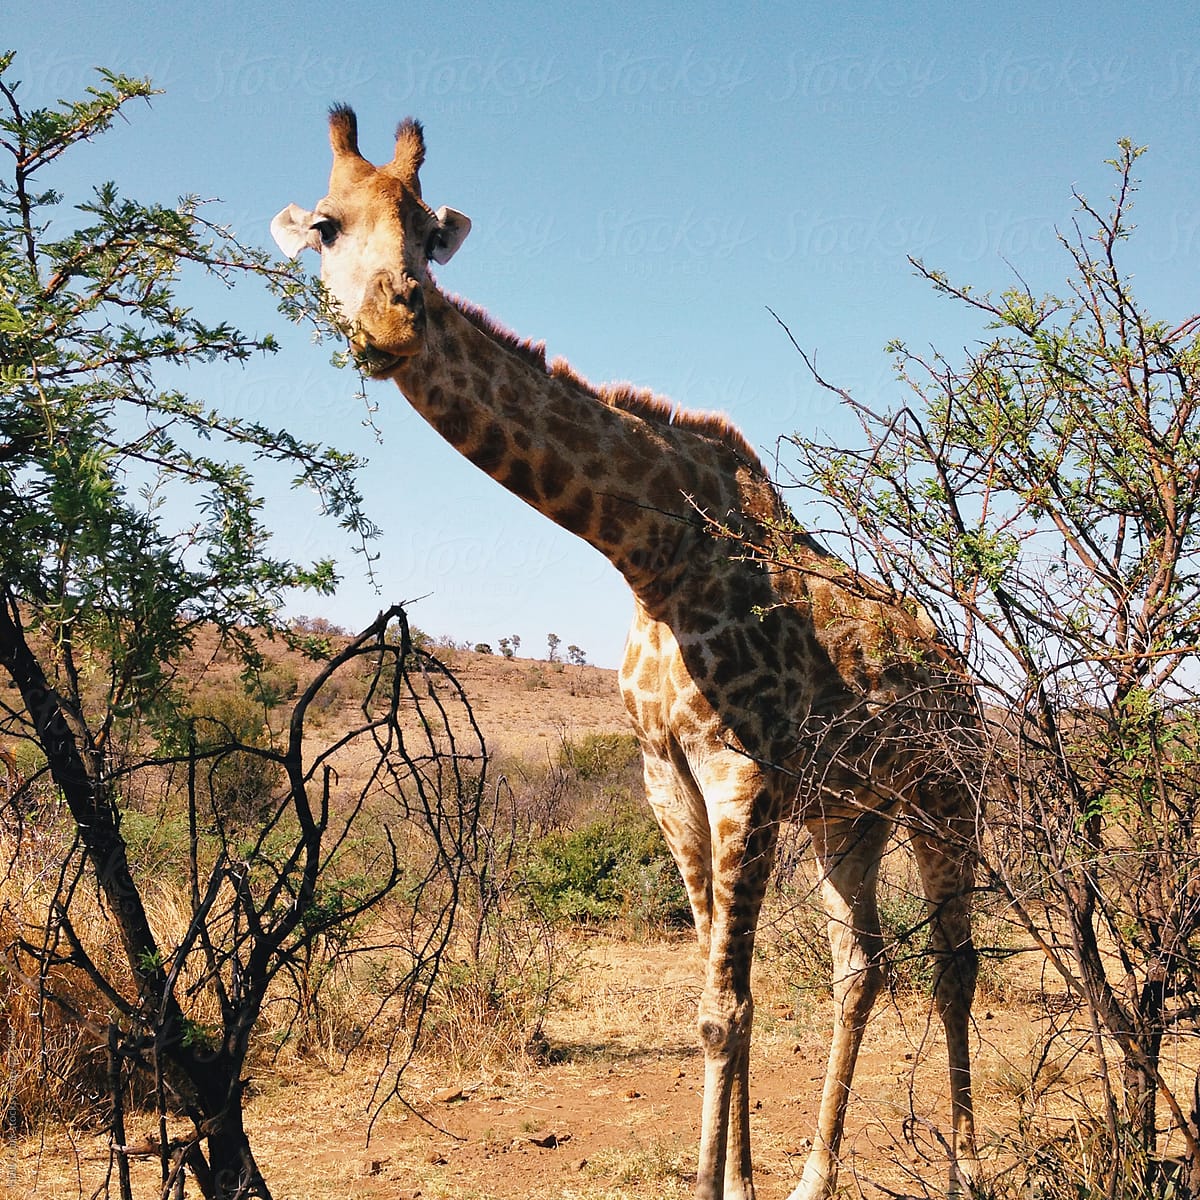 Giraffe bends long neck to eat leaves of a thorn tree